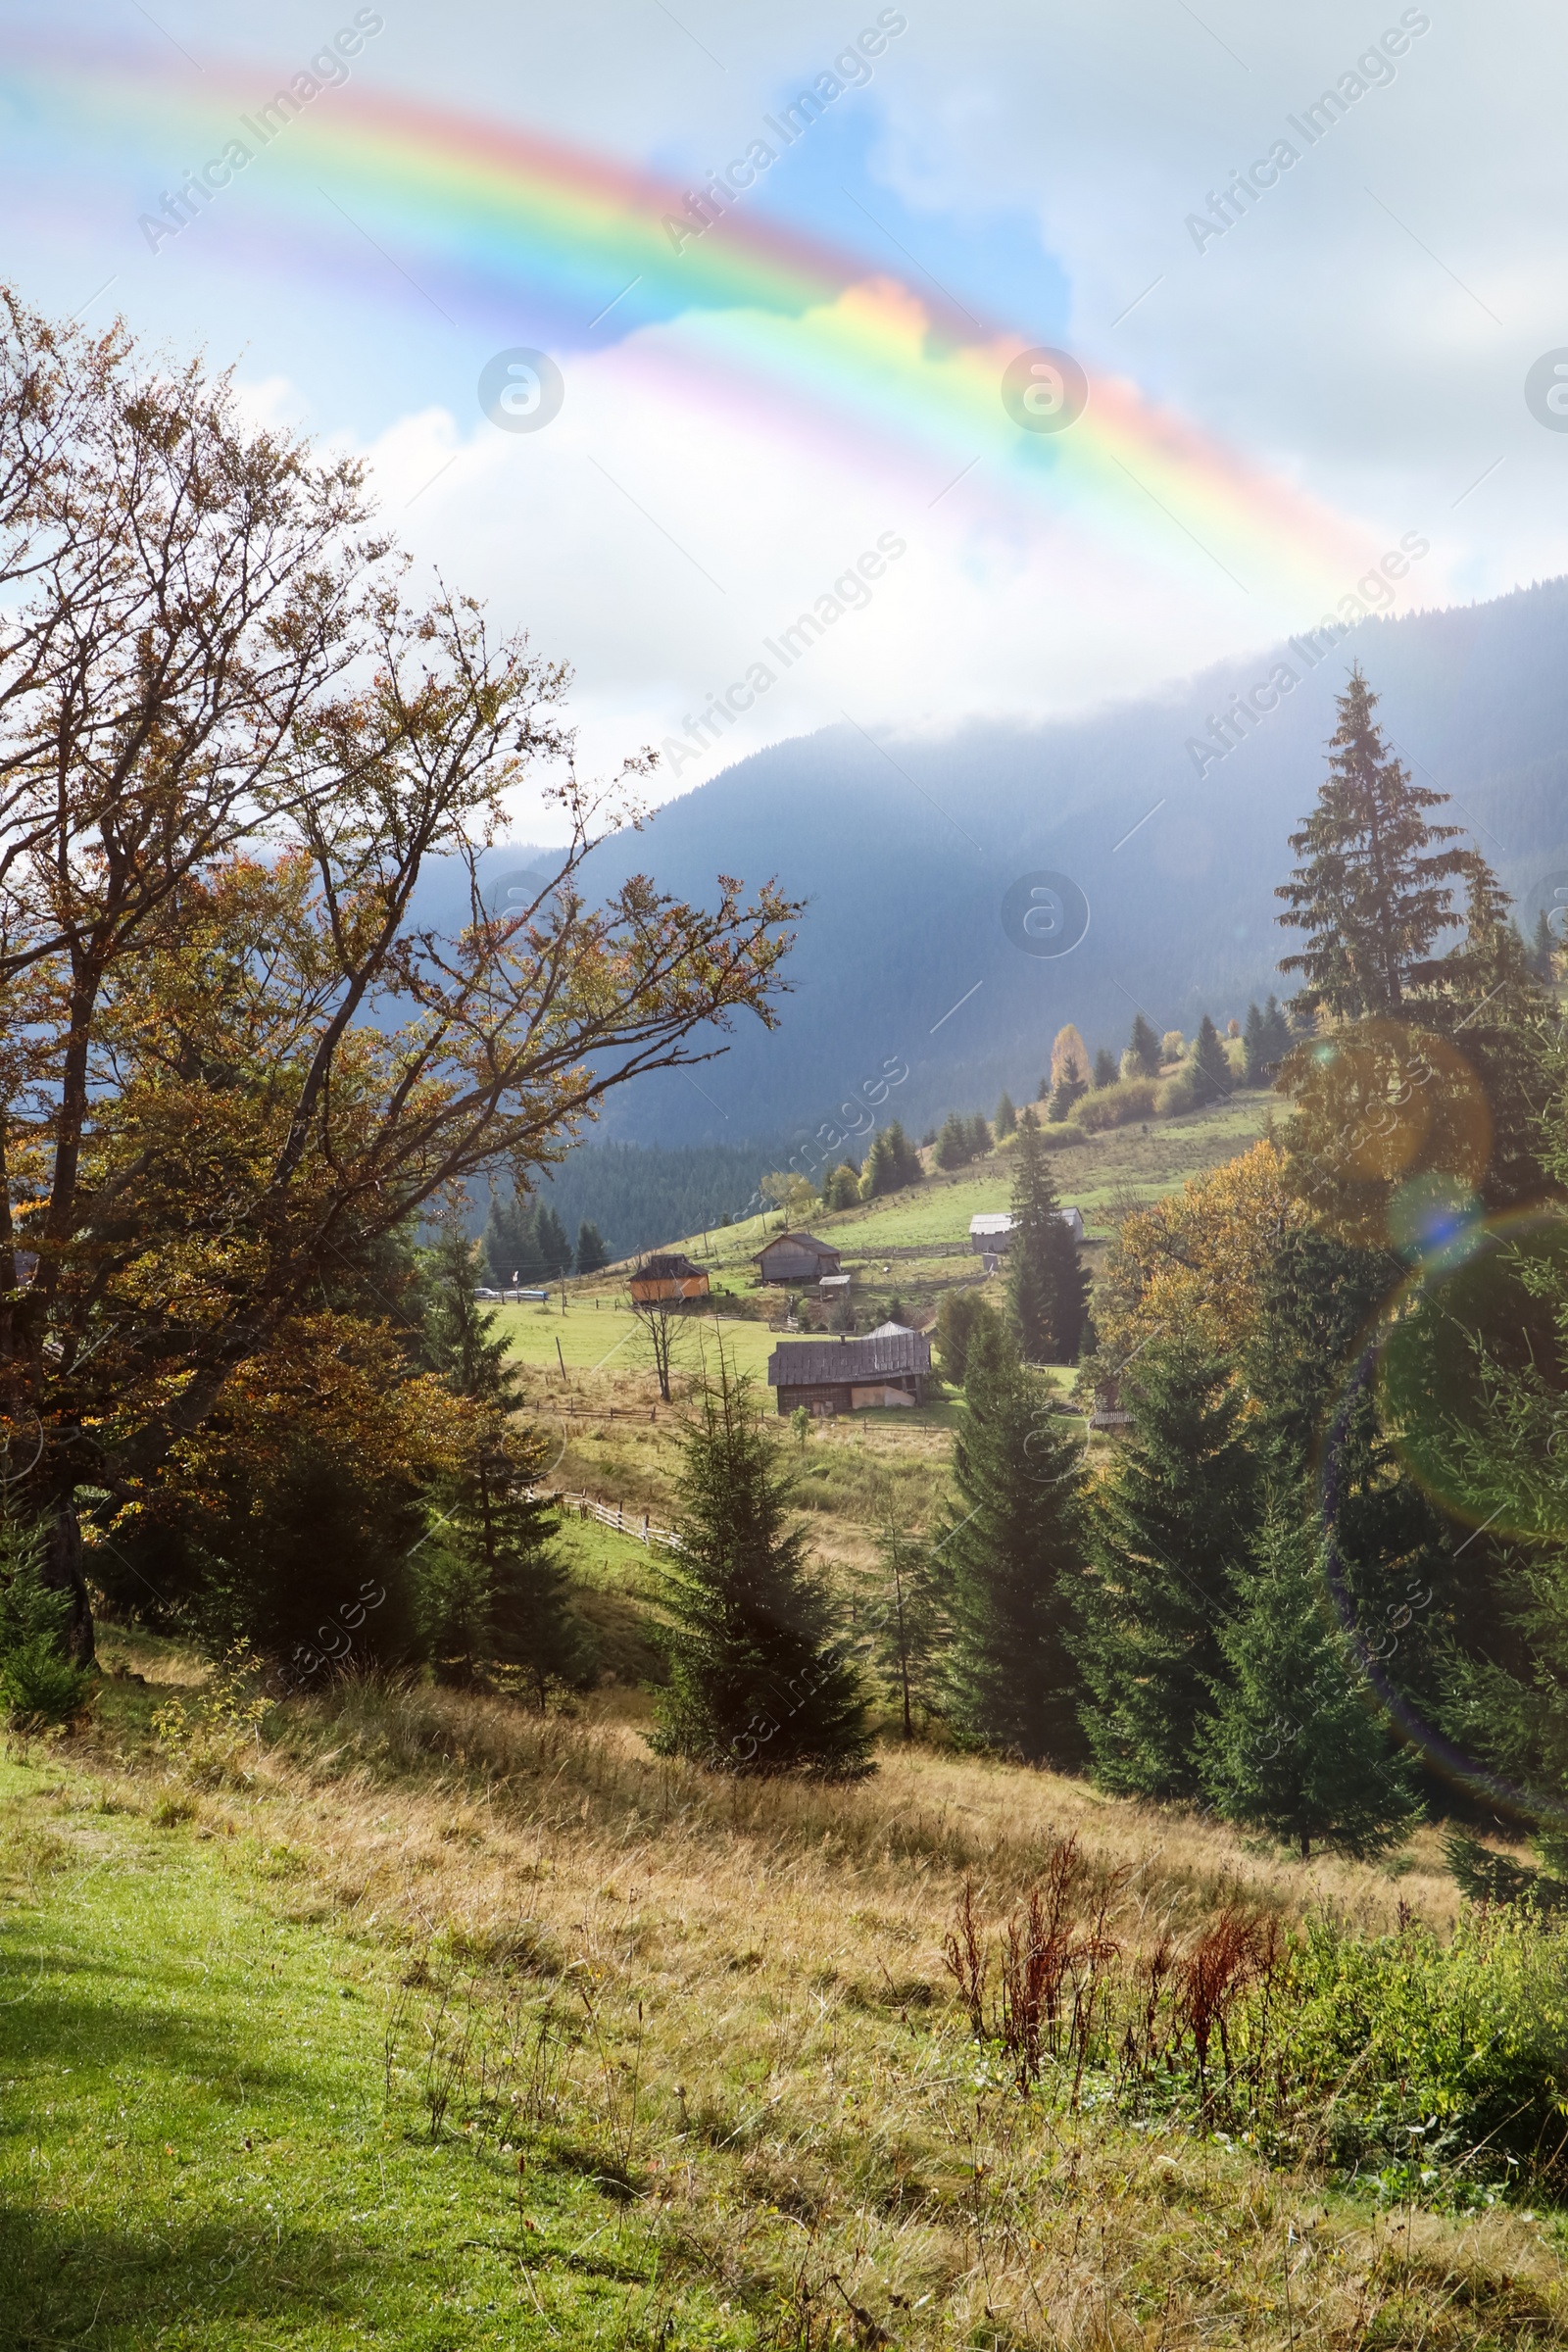 Image of Beautiful rainbow in blue sky over village in mountain on sunny day